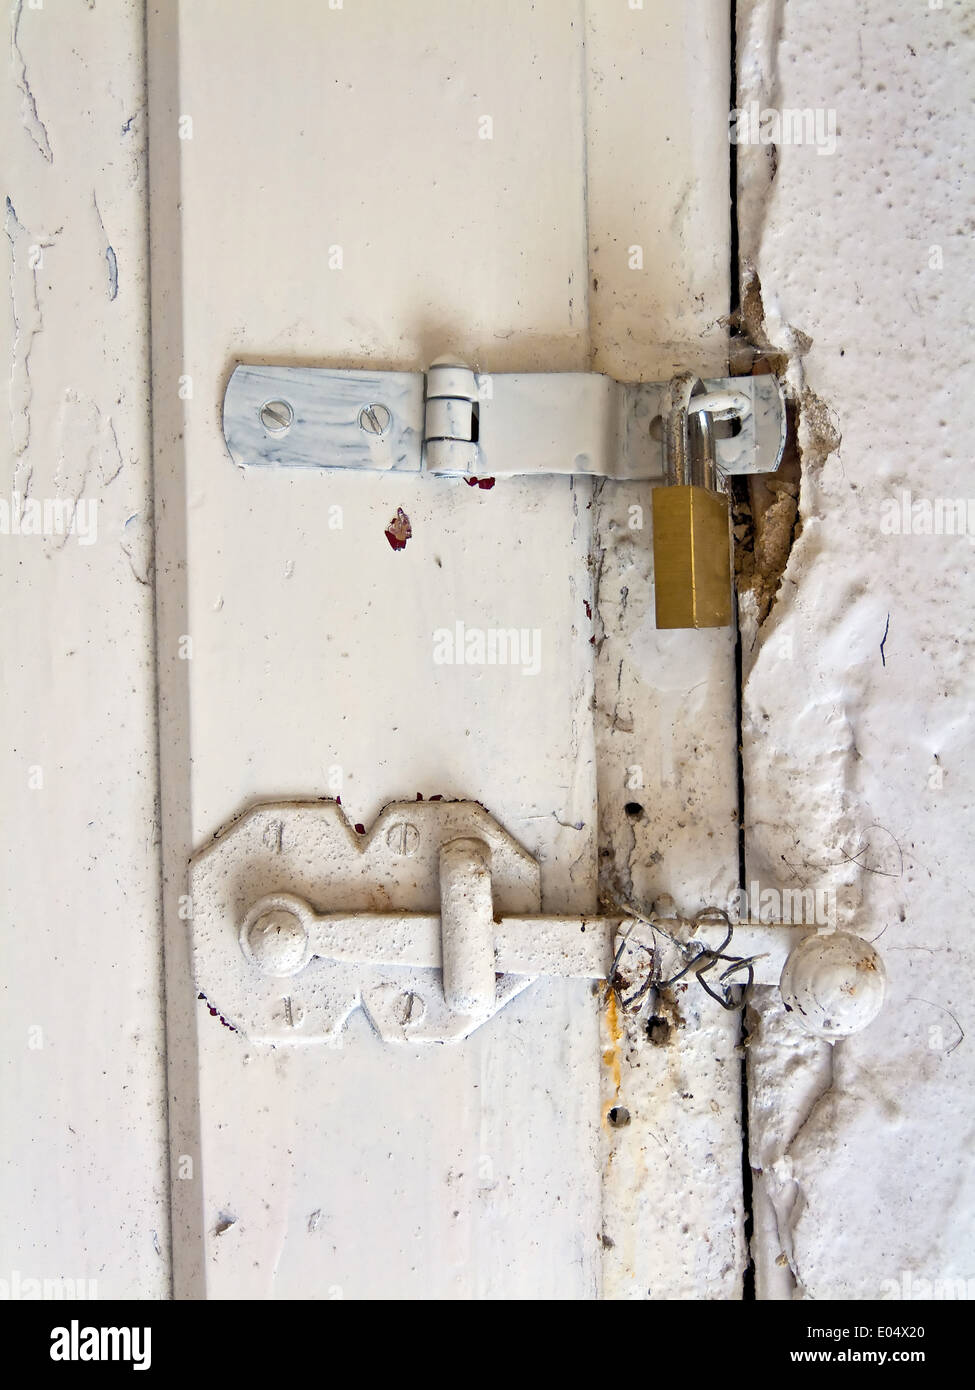 Old hinge of a T?re of a dwelling house, Altes Scharnier einer Tuere eines Wohnhauses Stock Photo